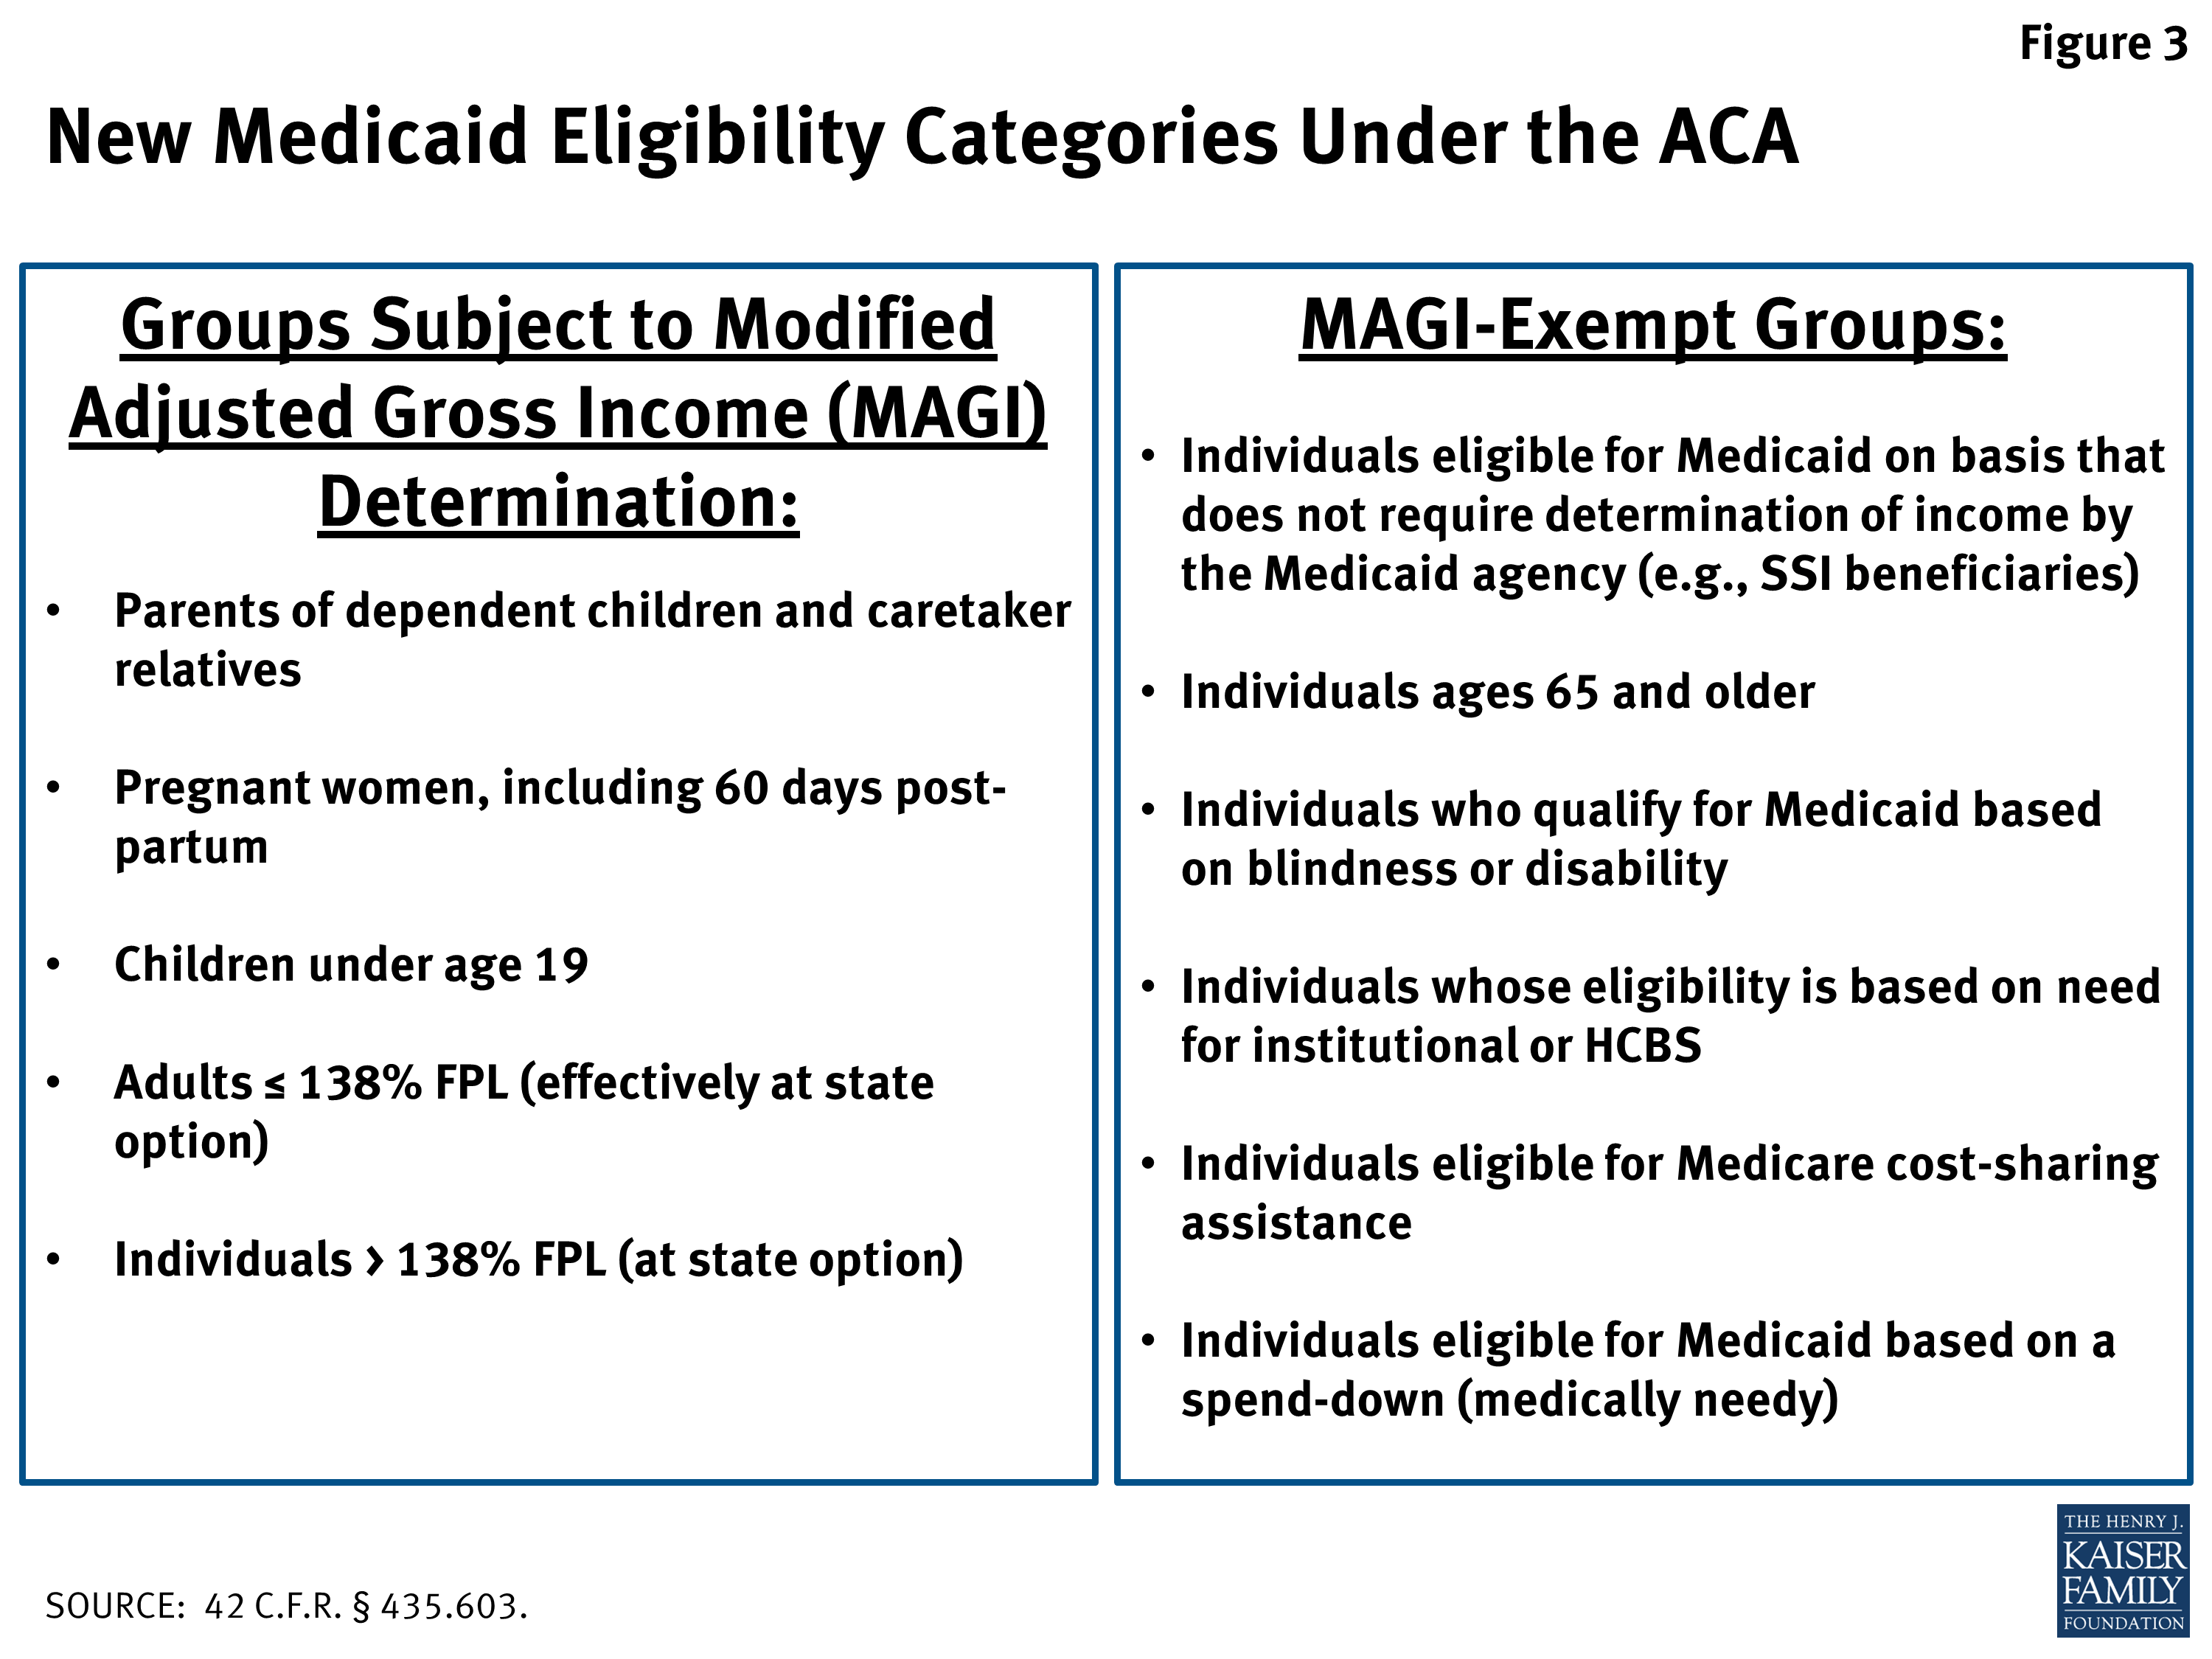 The Affordable Care Act’s Impact on Medicaid Eligibility, Enrollment